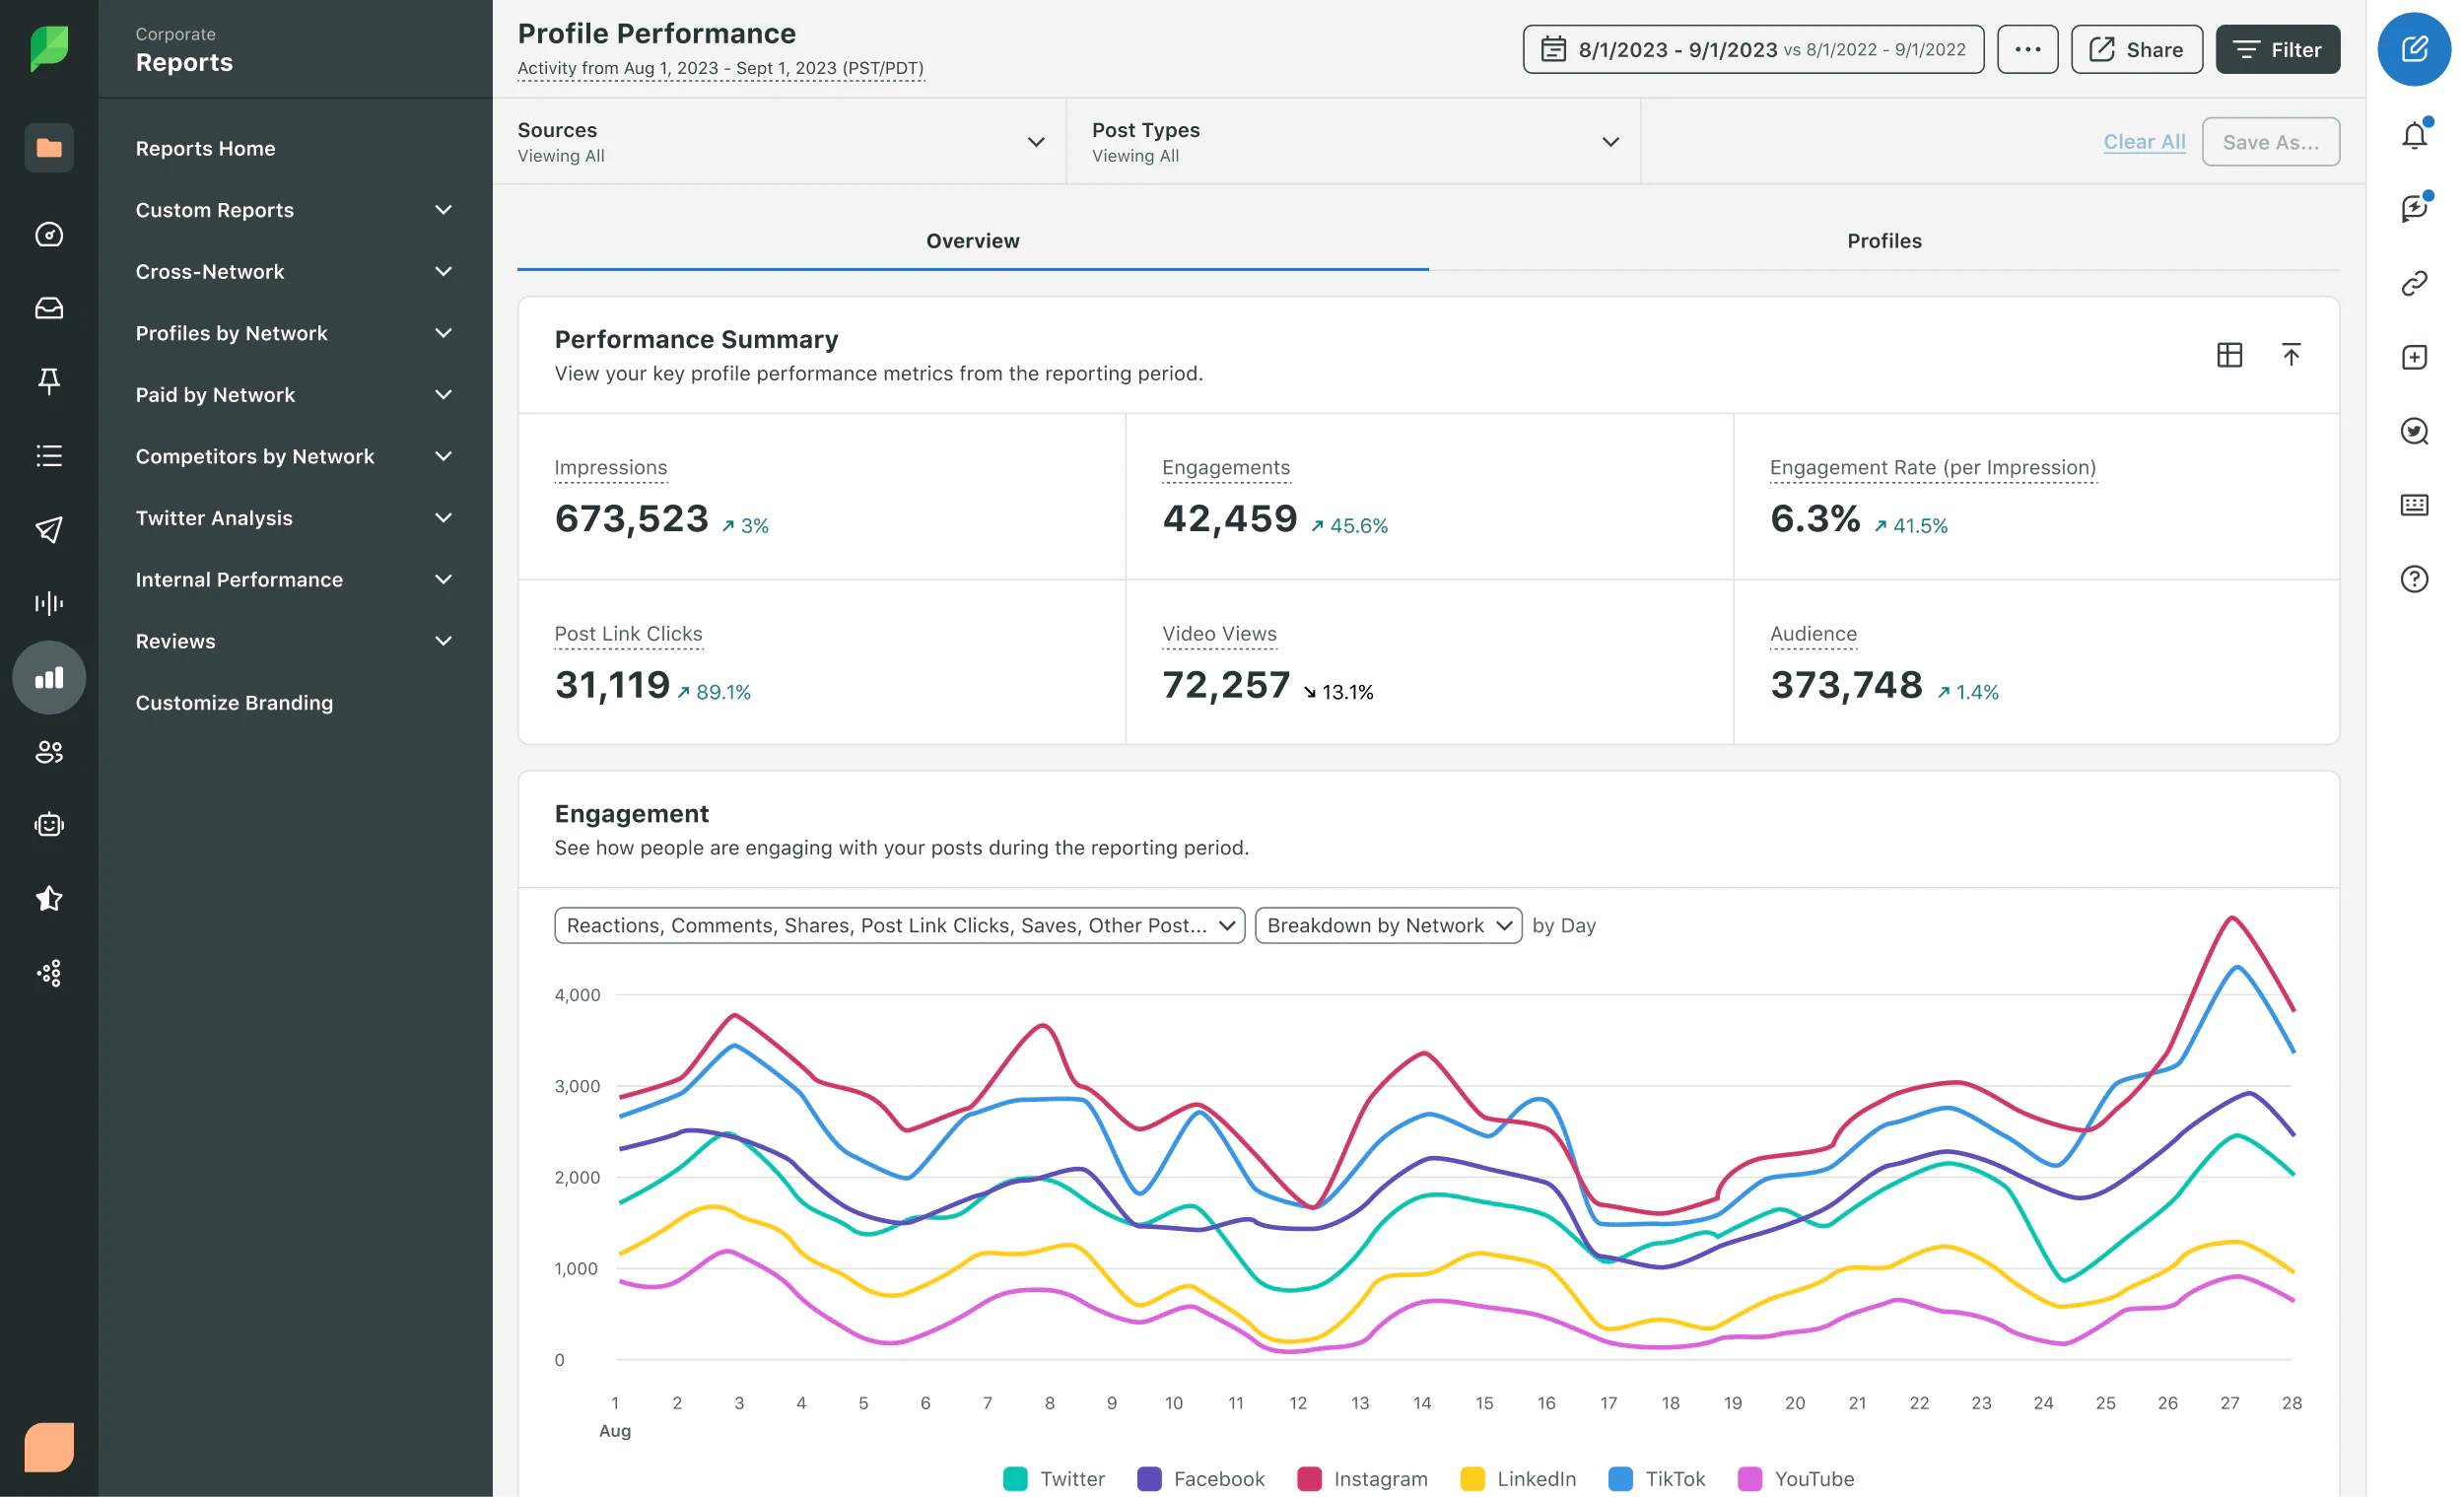 Example of a monthly social media profile performance report including: impressions, engagements, video views, post click links, and audience growth.